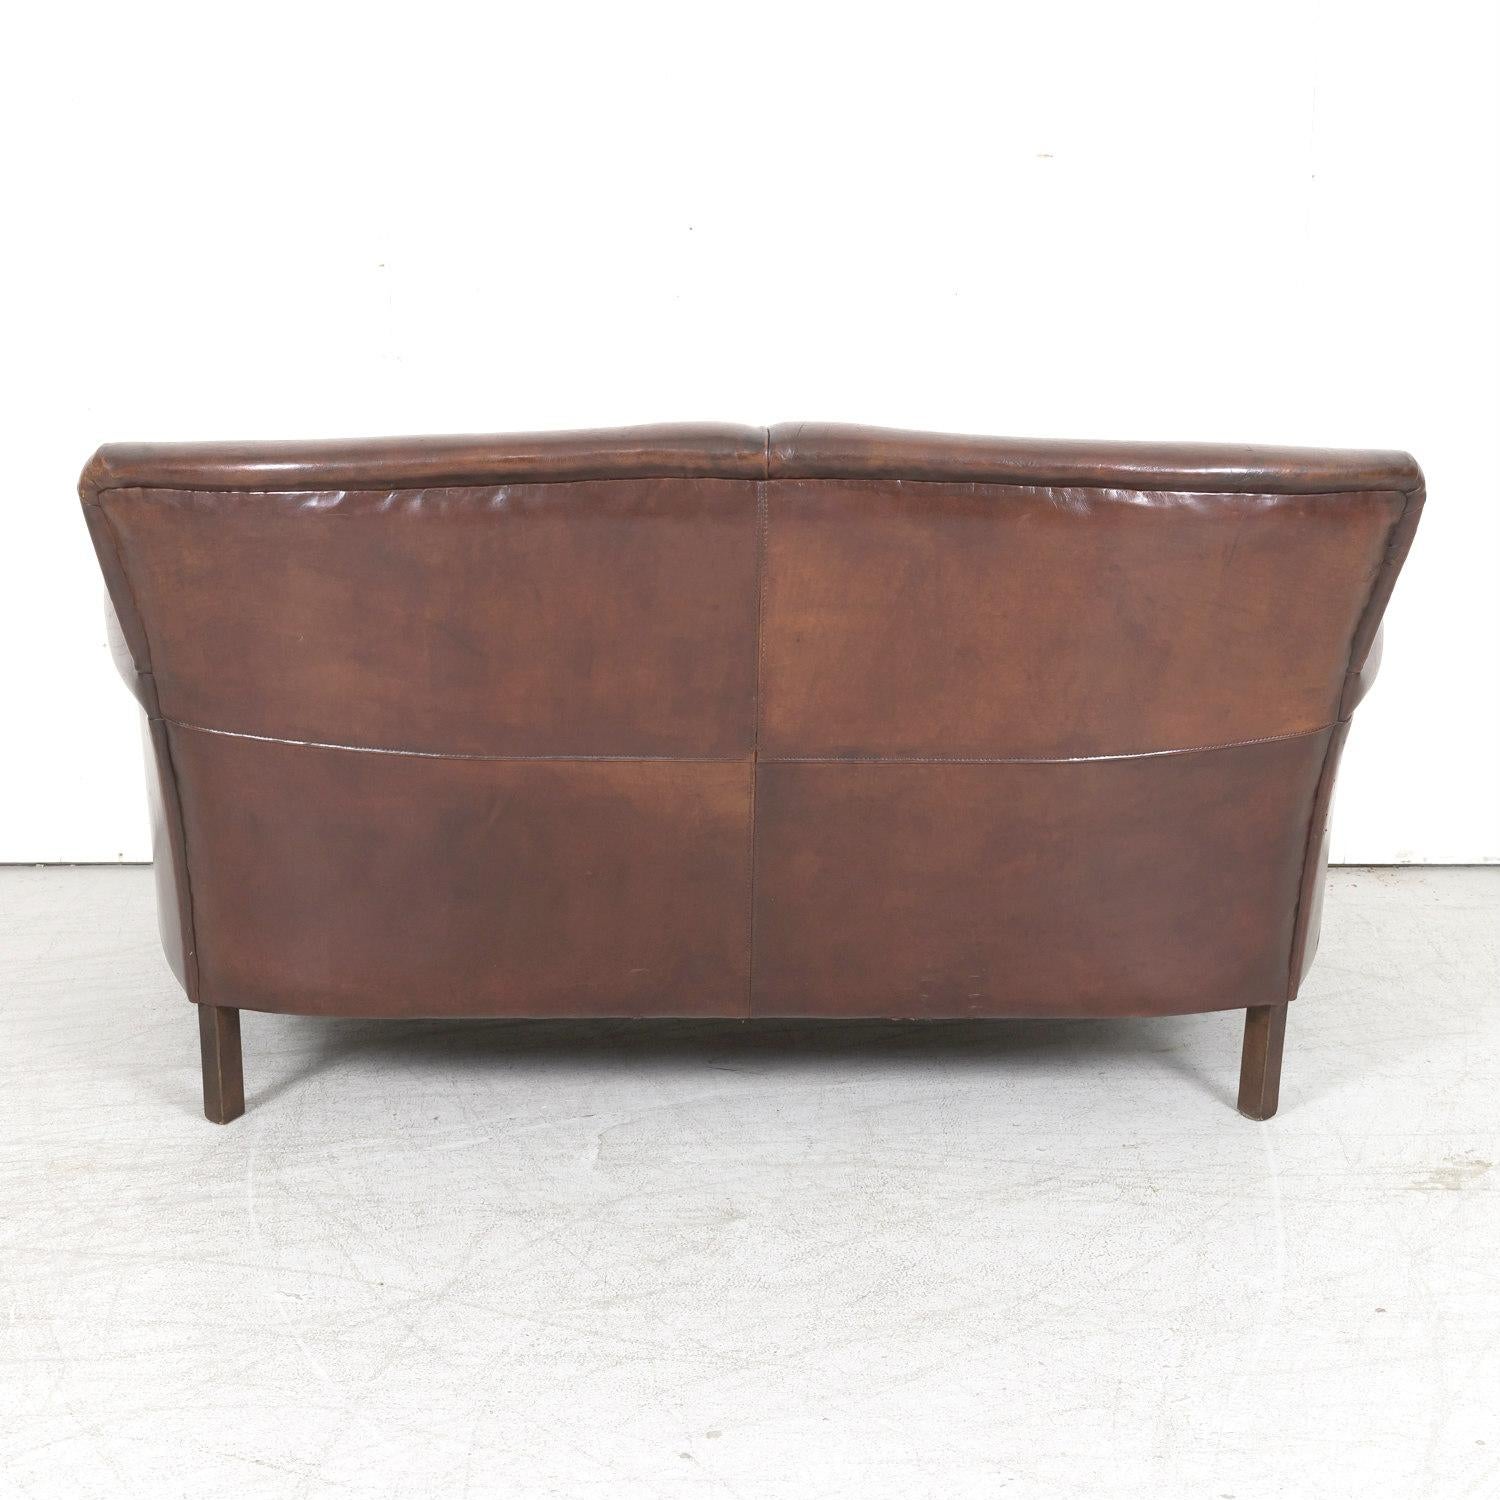 20th Century French Art Deco Settee or Sofa in Original Dark Brown Leather For Sale 11